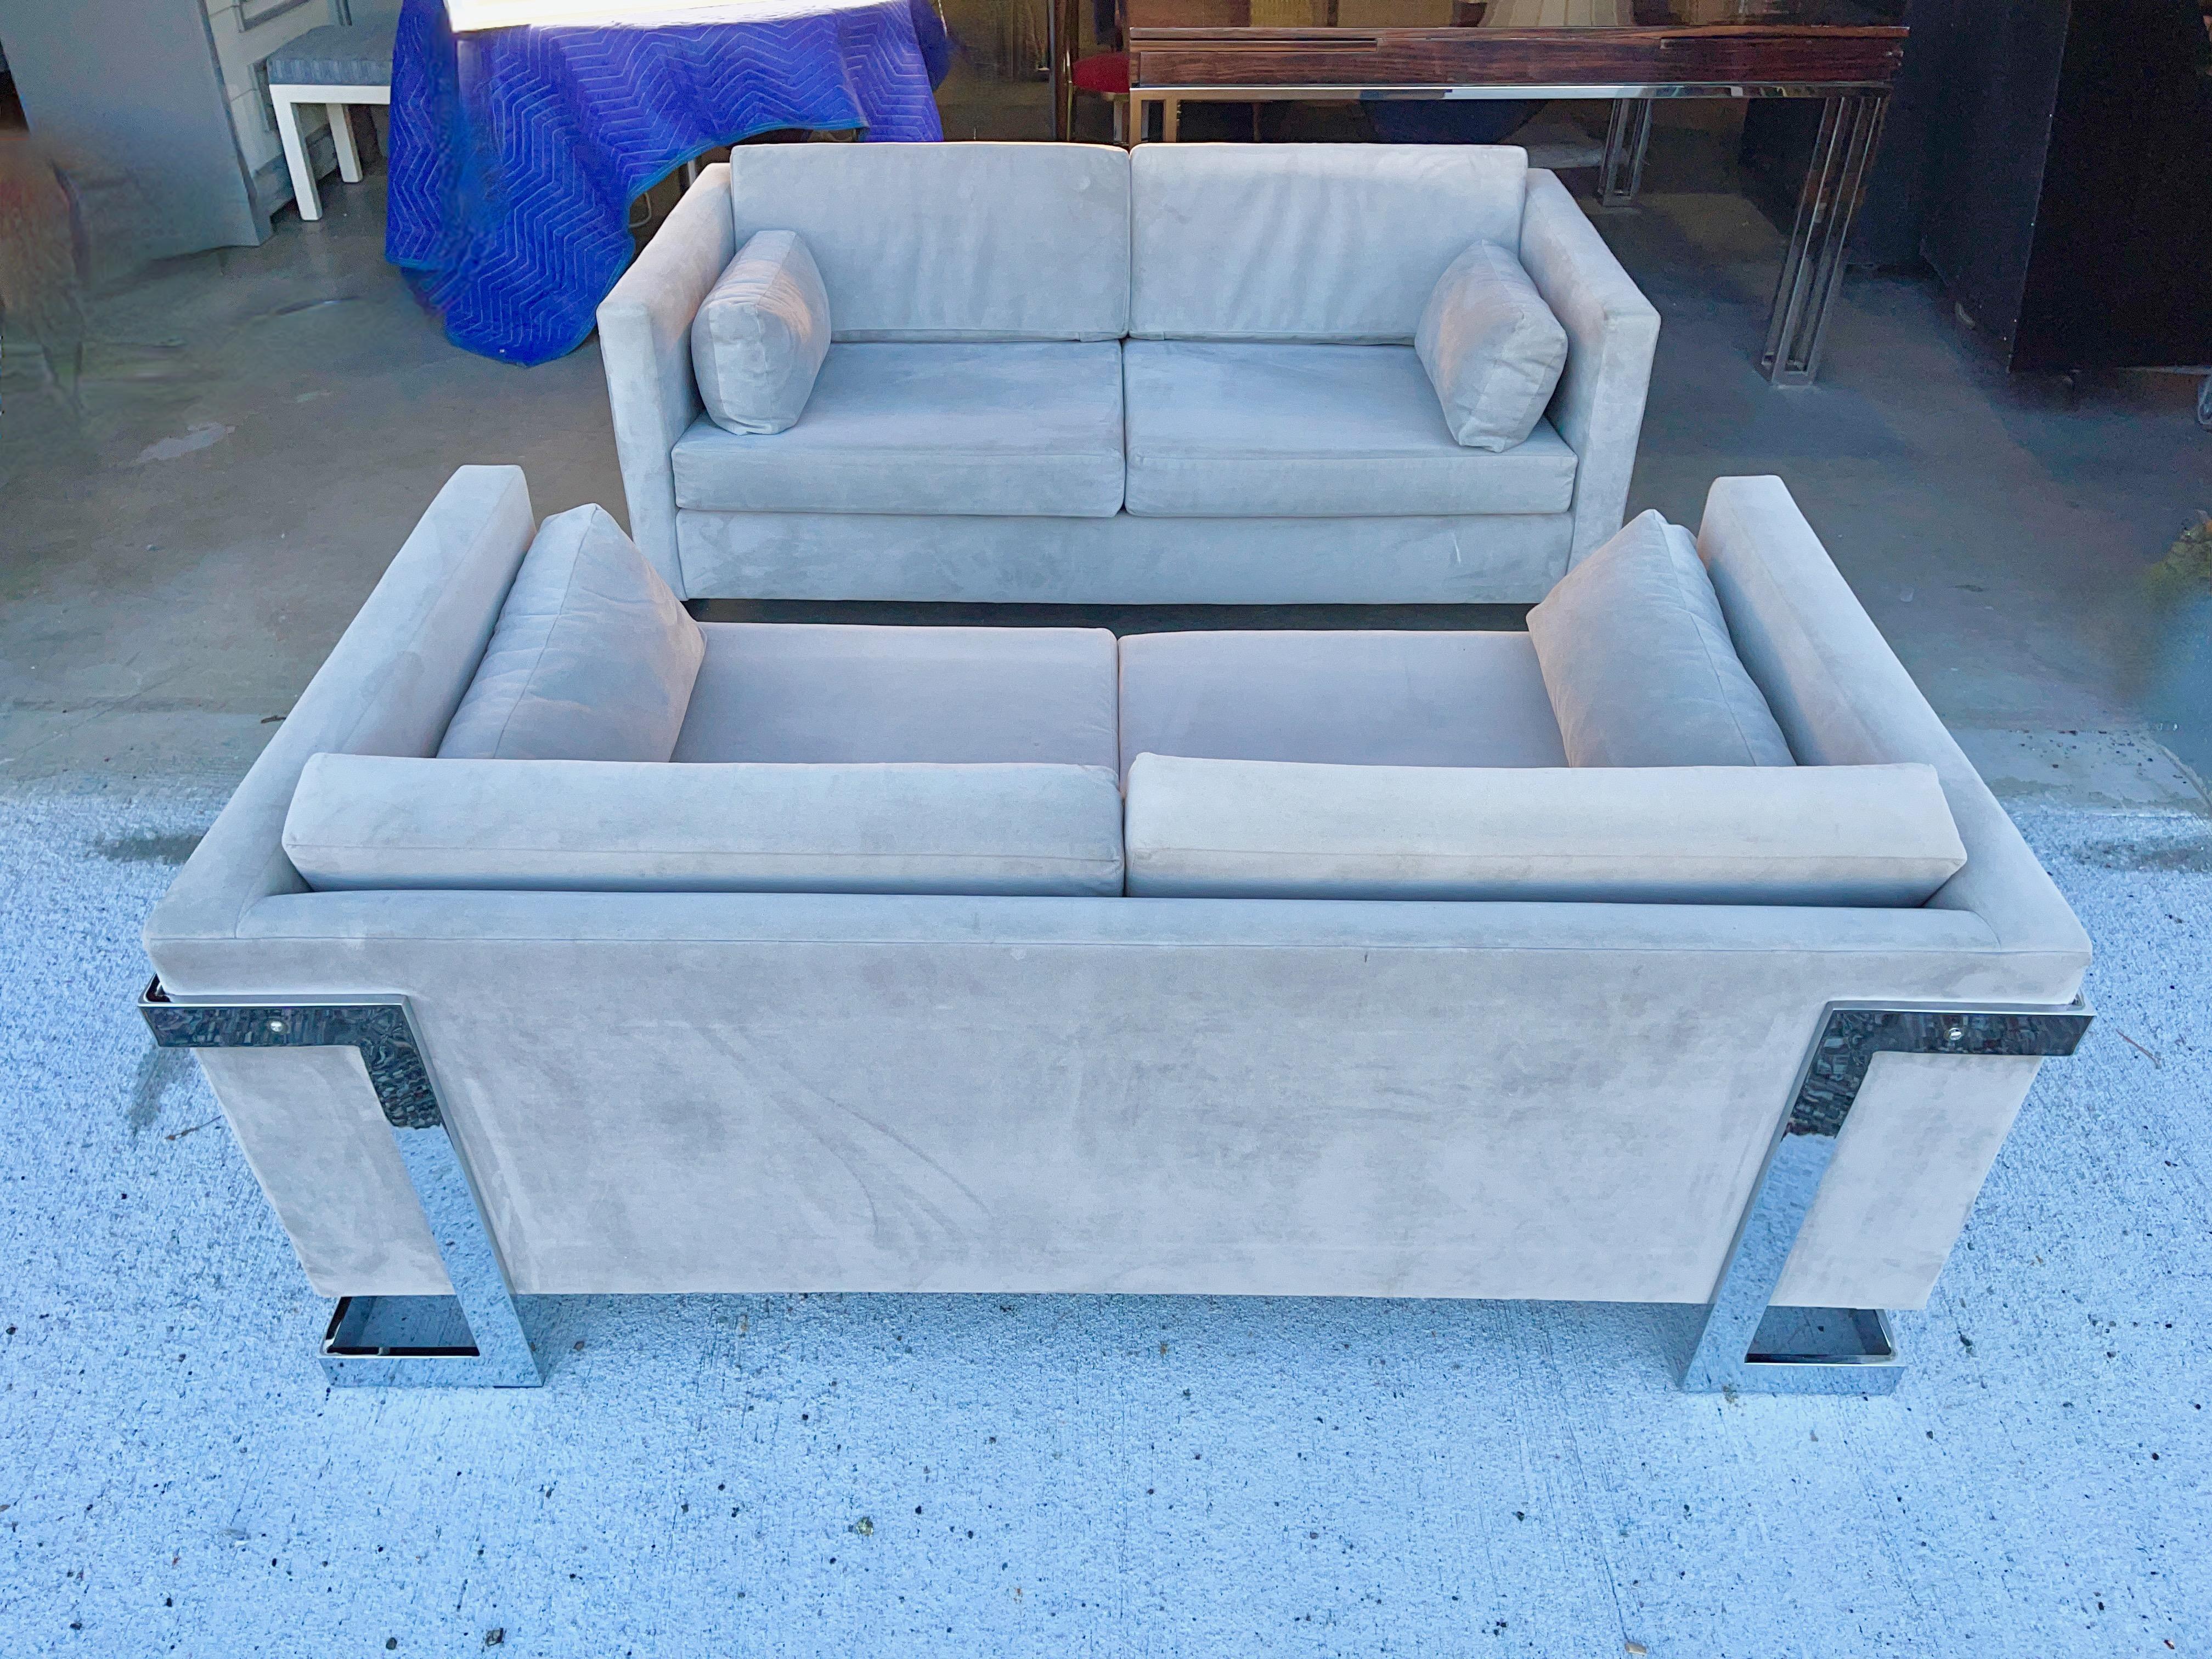 Pair of vintage 1970's chrome framed cantilevered loveseat sofas in the style of Milo Baughman and similar to seating groups of the period by Selig and Bernhardt's Flair division.
These have been reupholstered at some point in their life so no